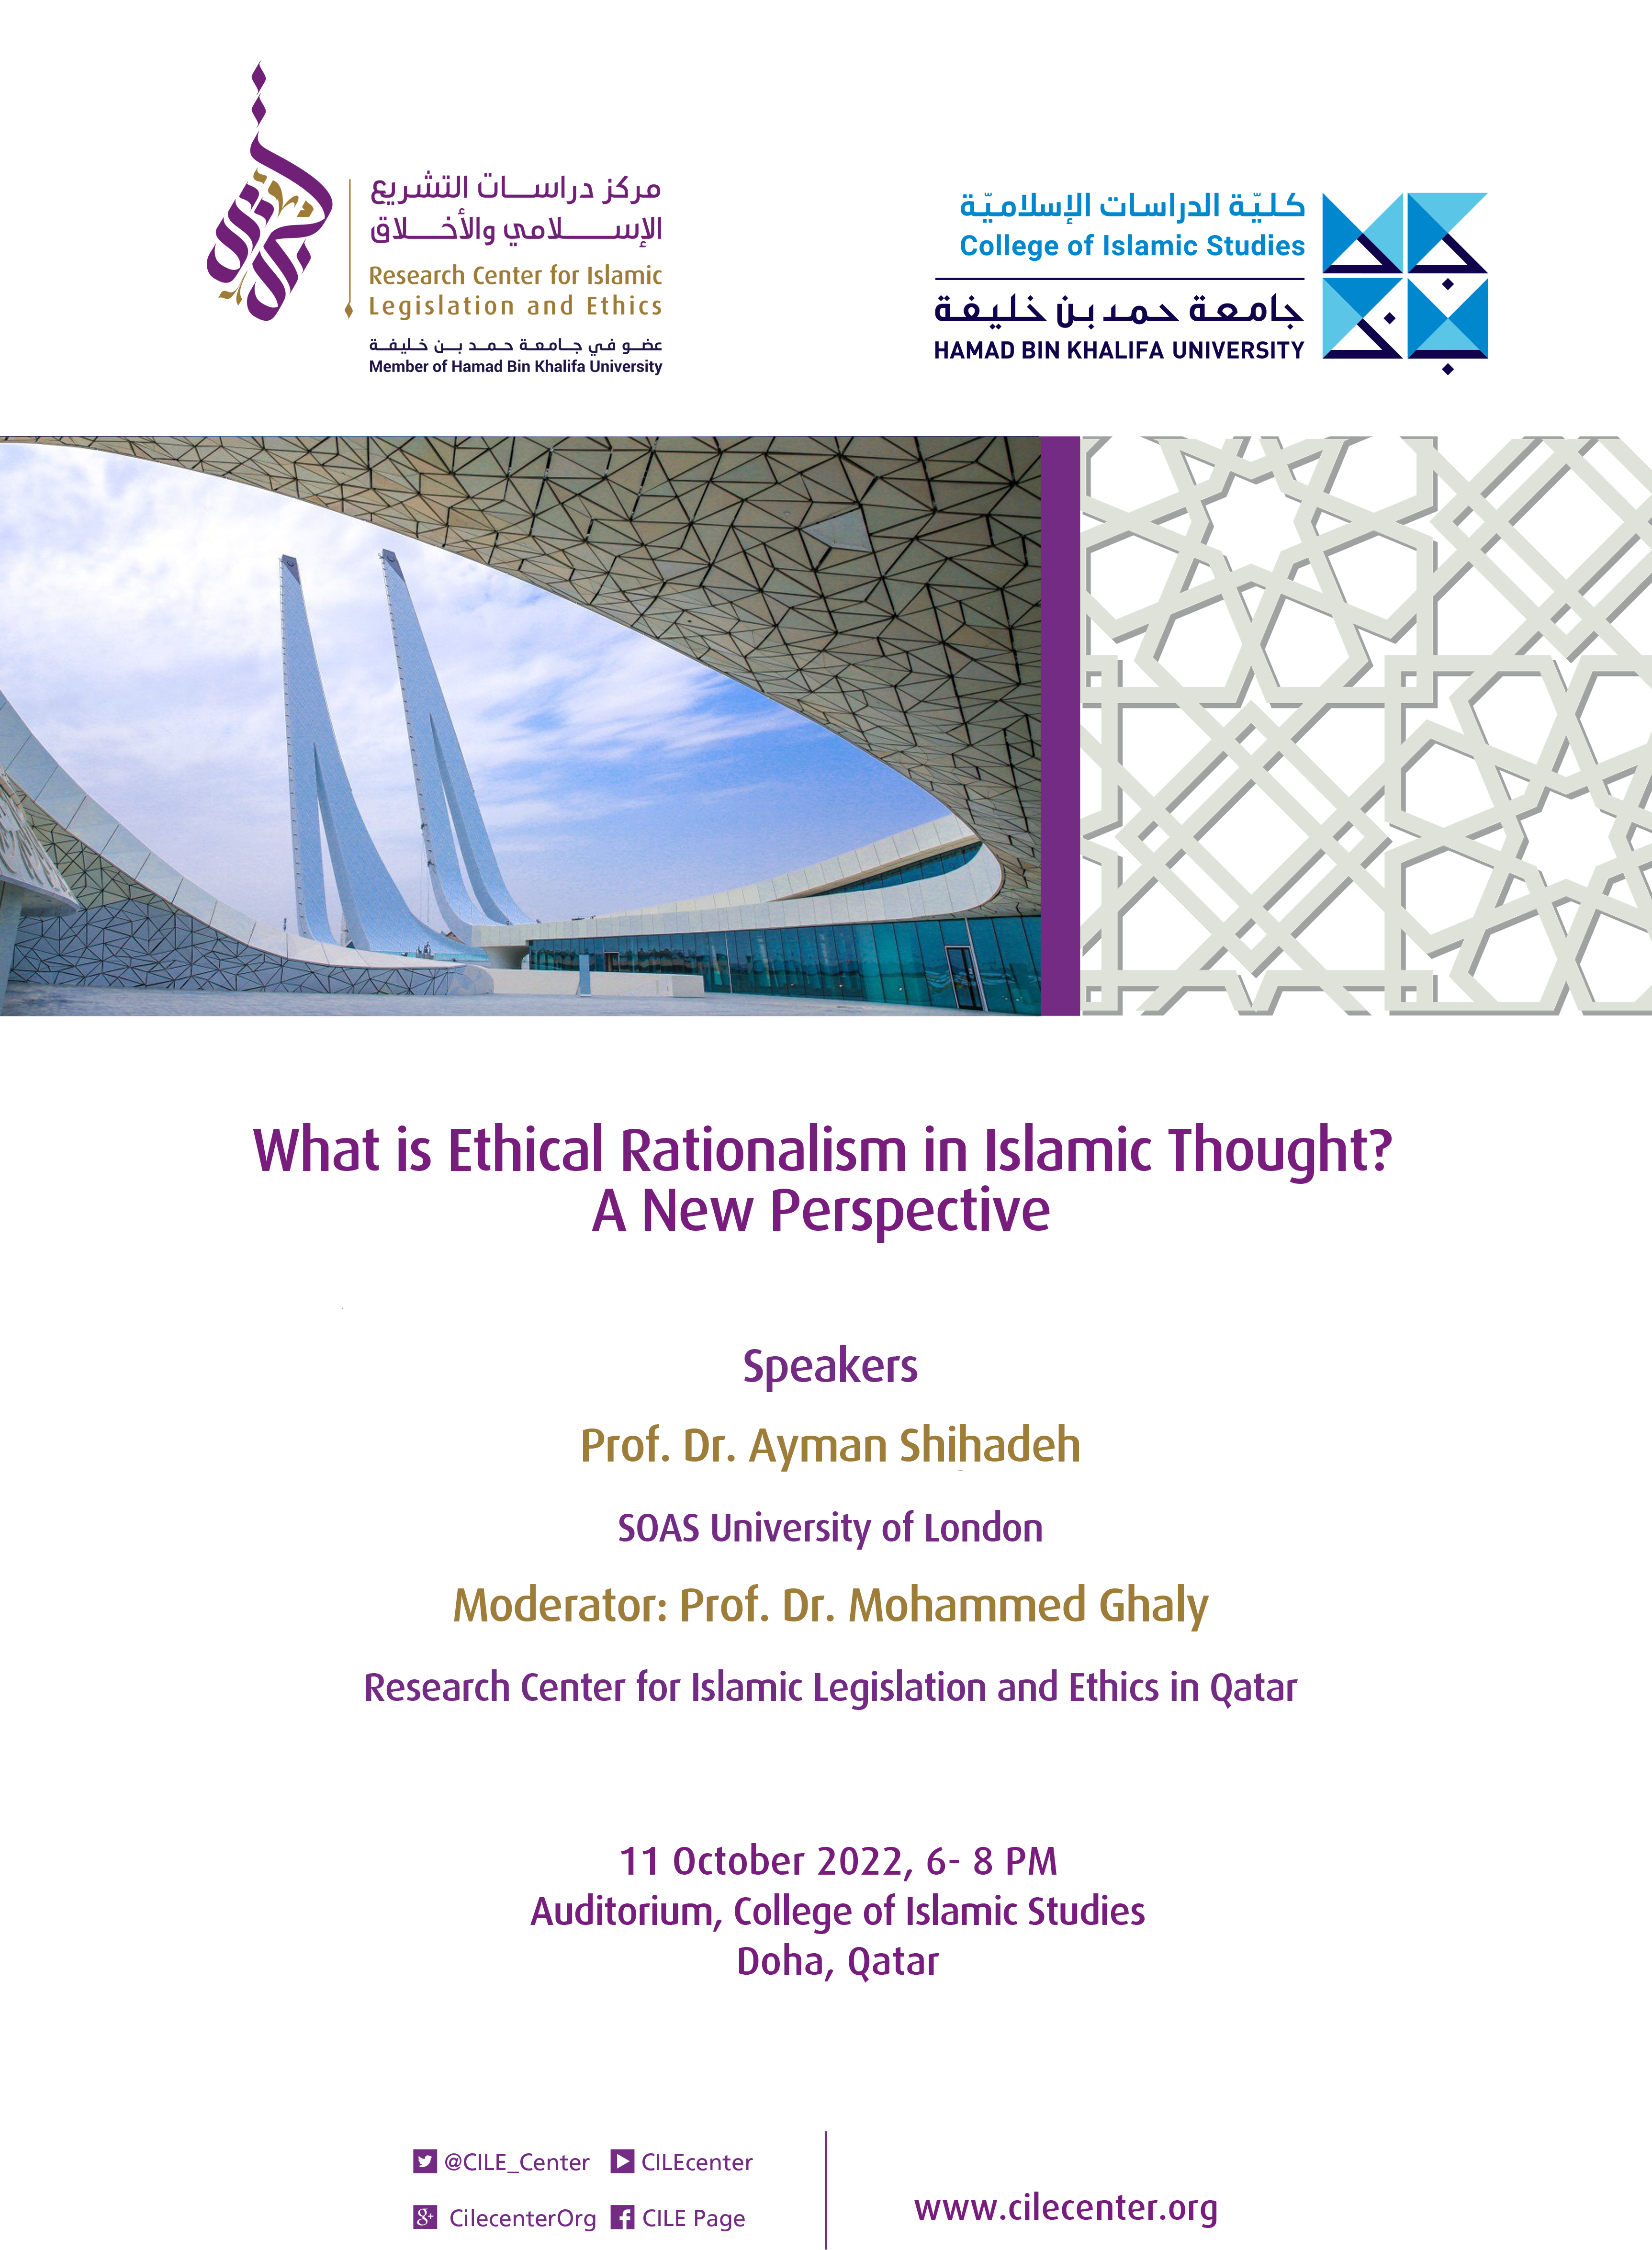 What is Ethical Rationalism in Islamic Thought? A New Perspective